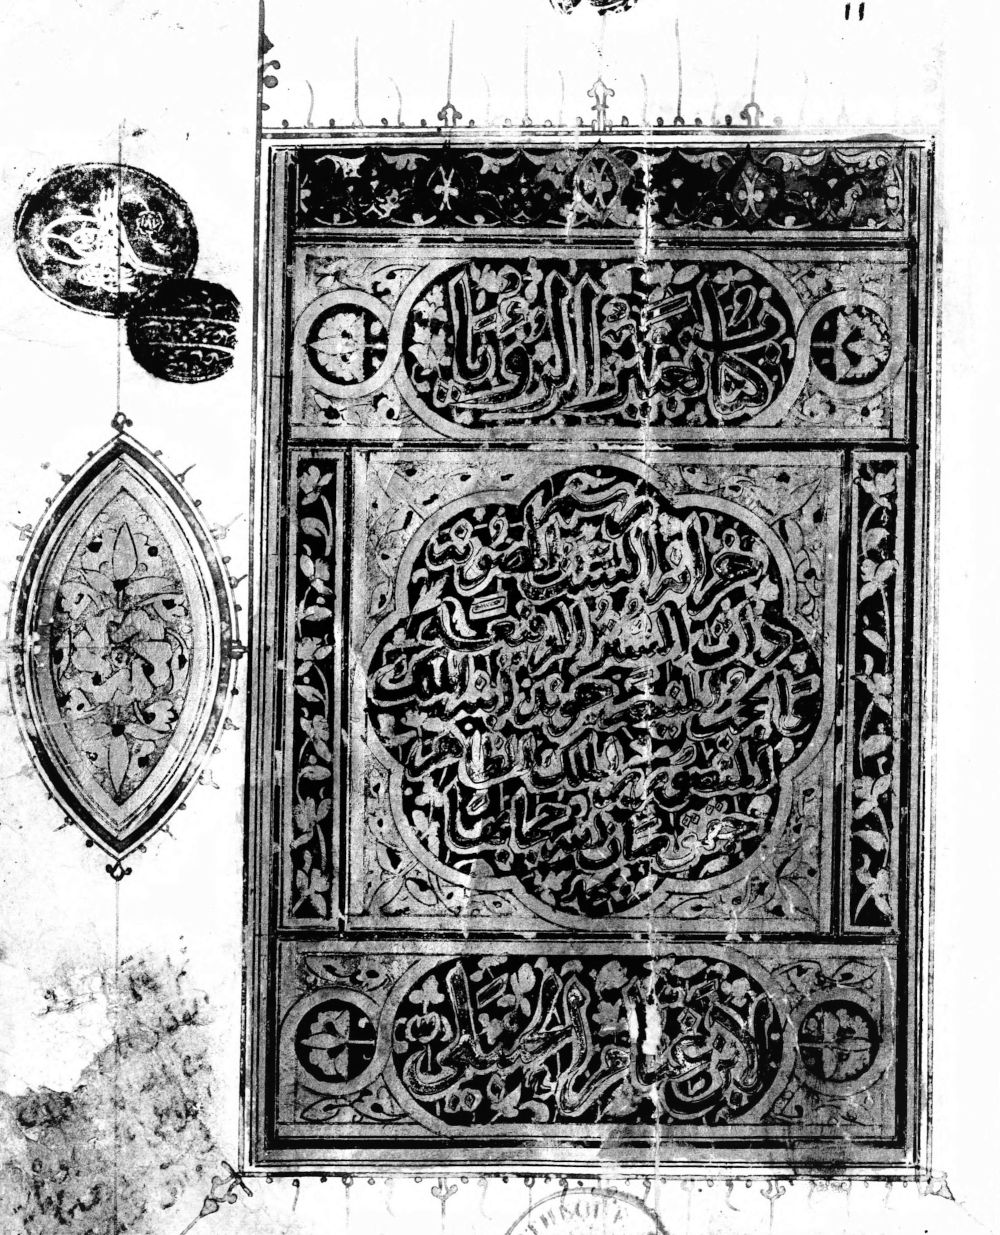 MS BNF Arabe 2751, Title page of the amiriyya copy of the treatise of Ibn Ghannām